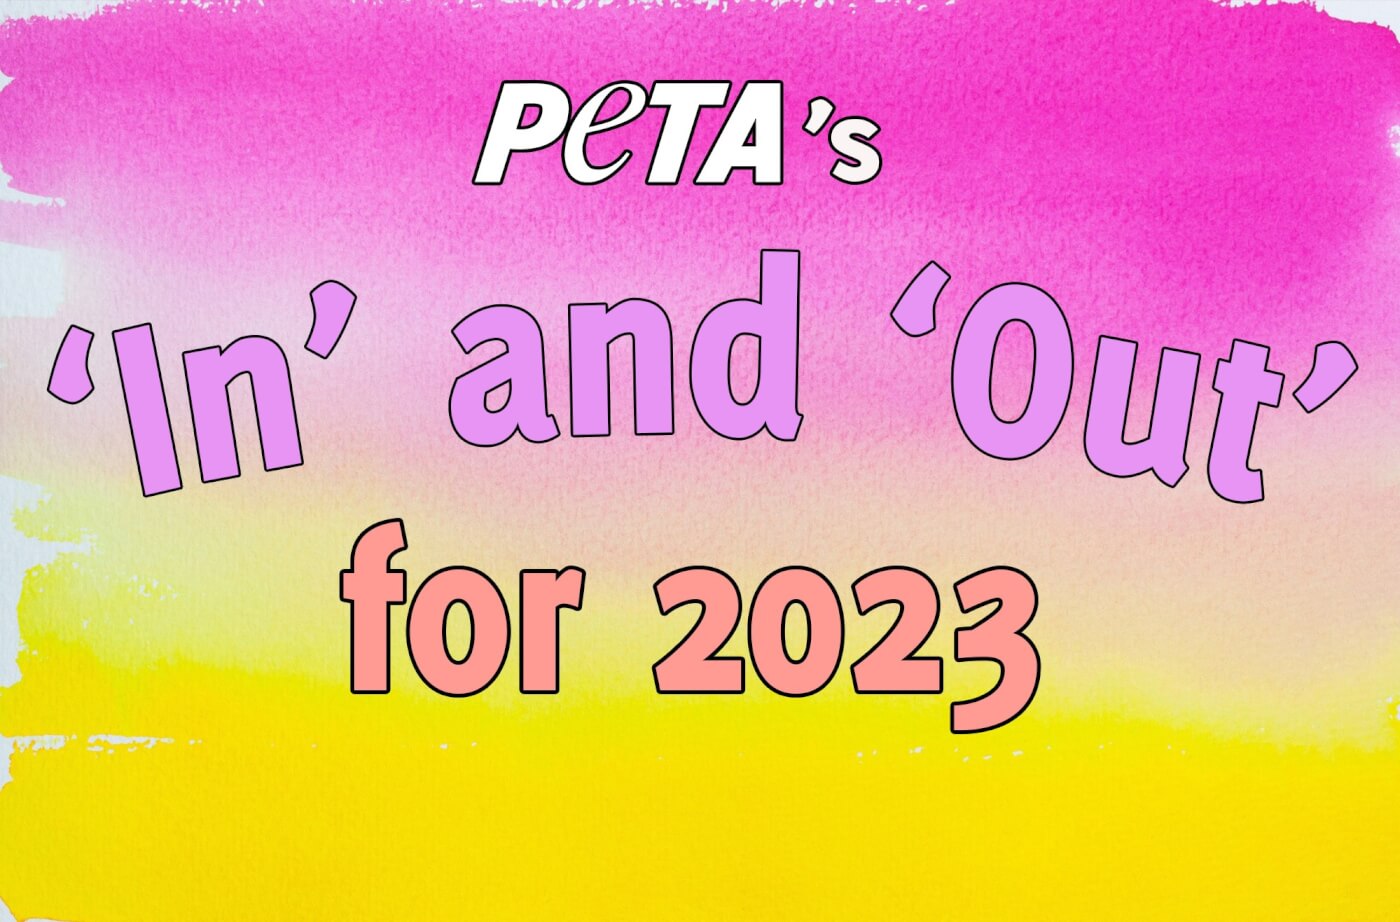 PETA's in and out for 2023 feautre image with fun watercolor background